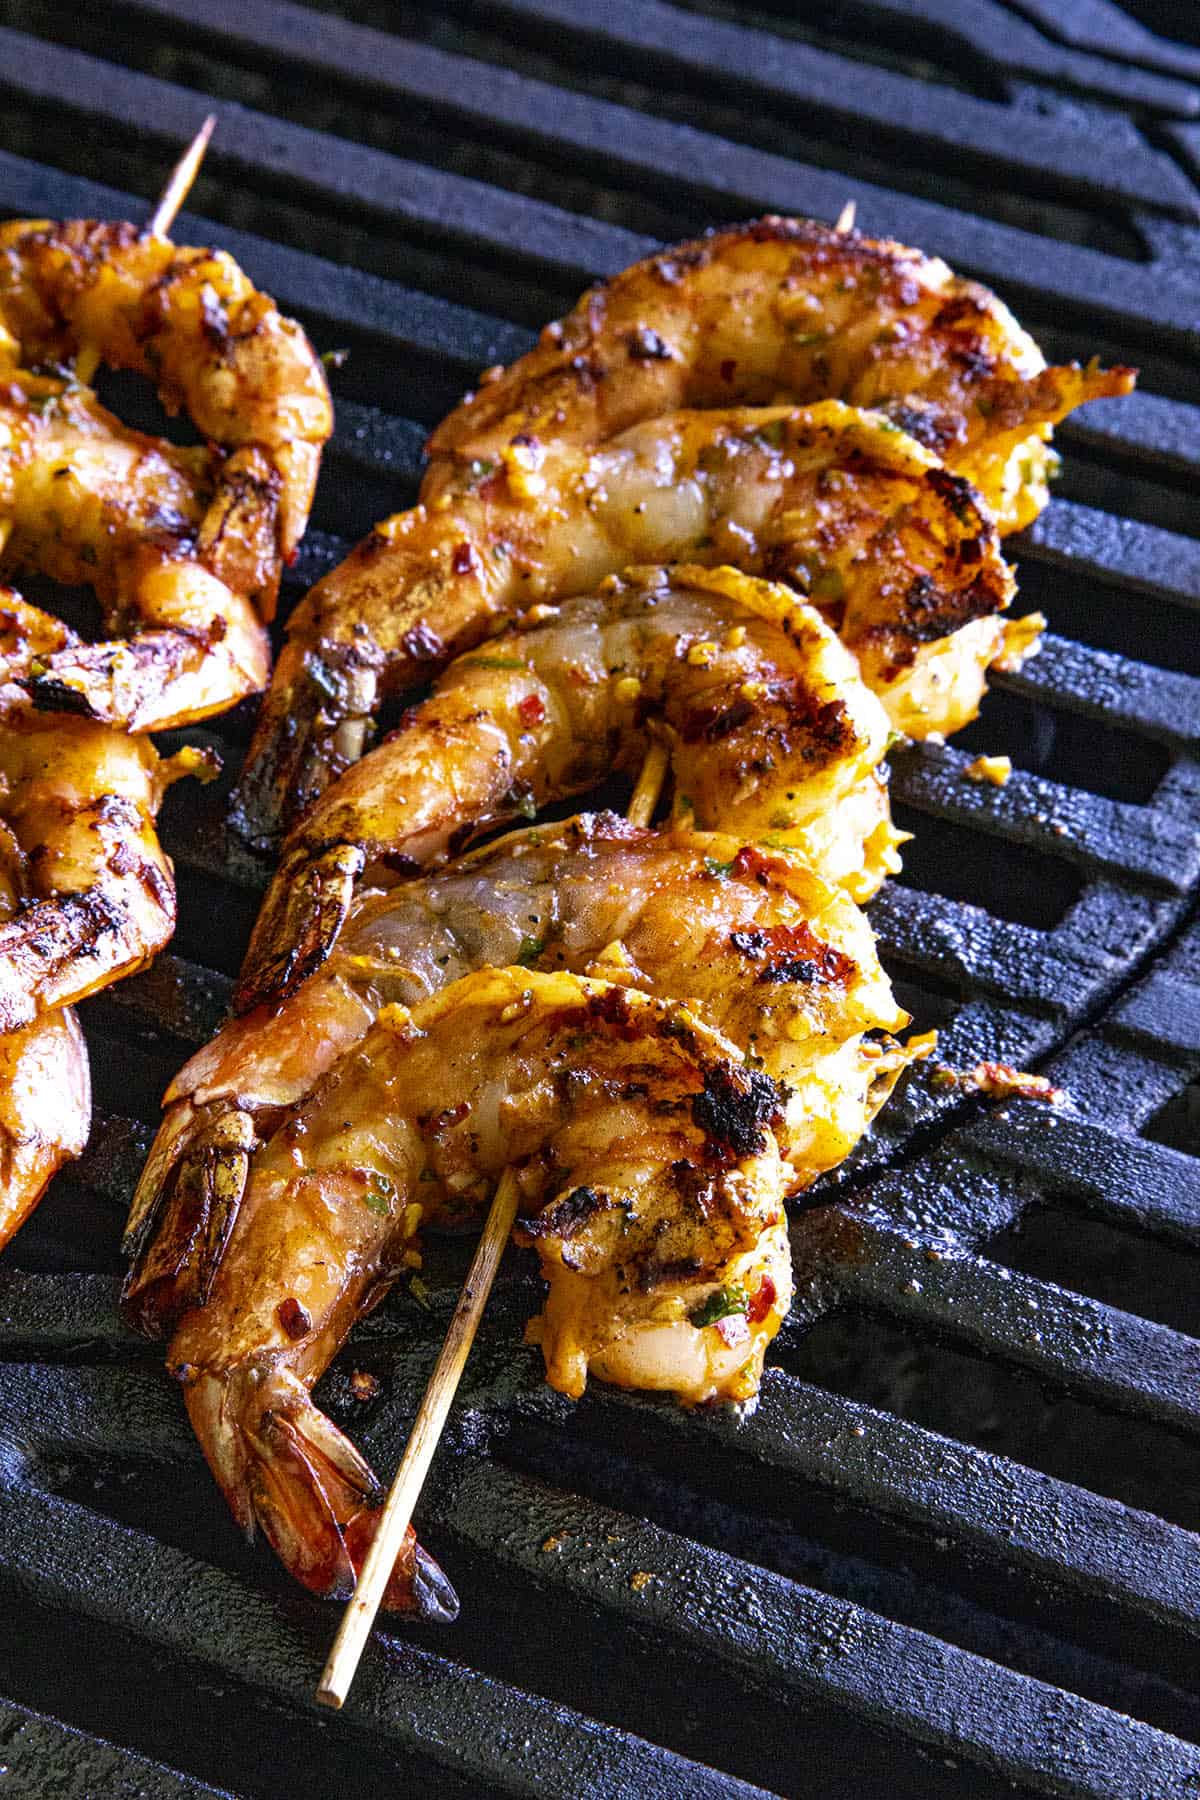 Grilled shrimp on the grill